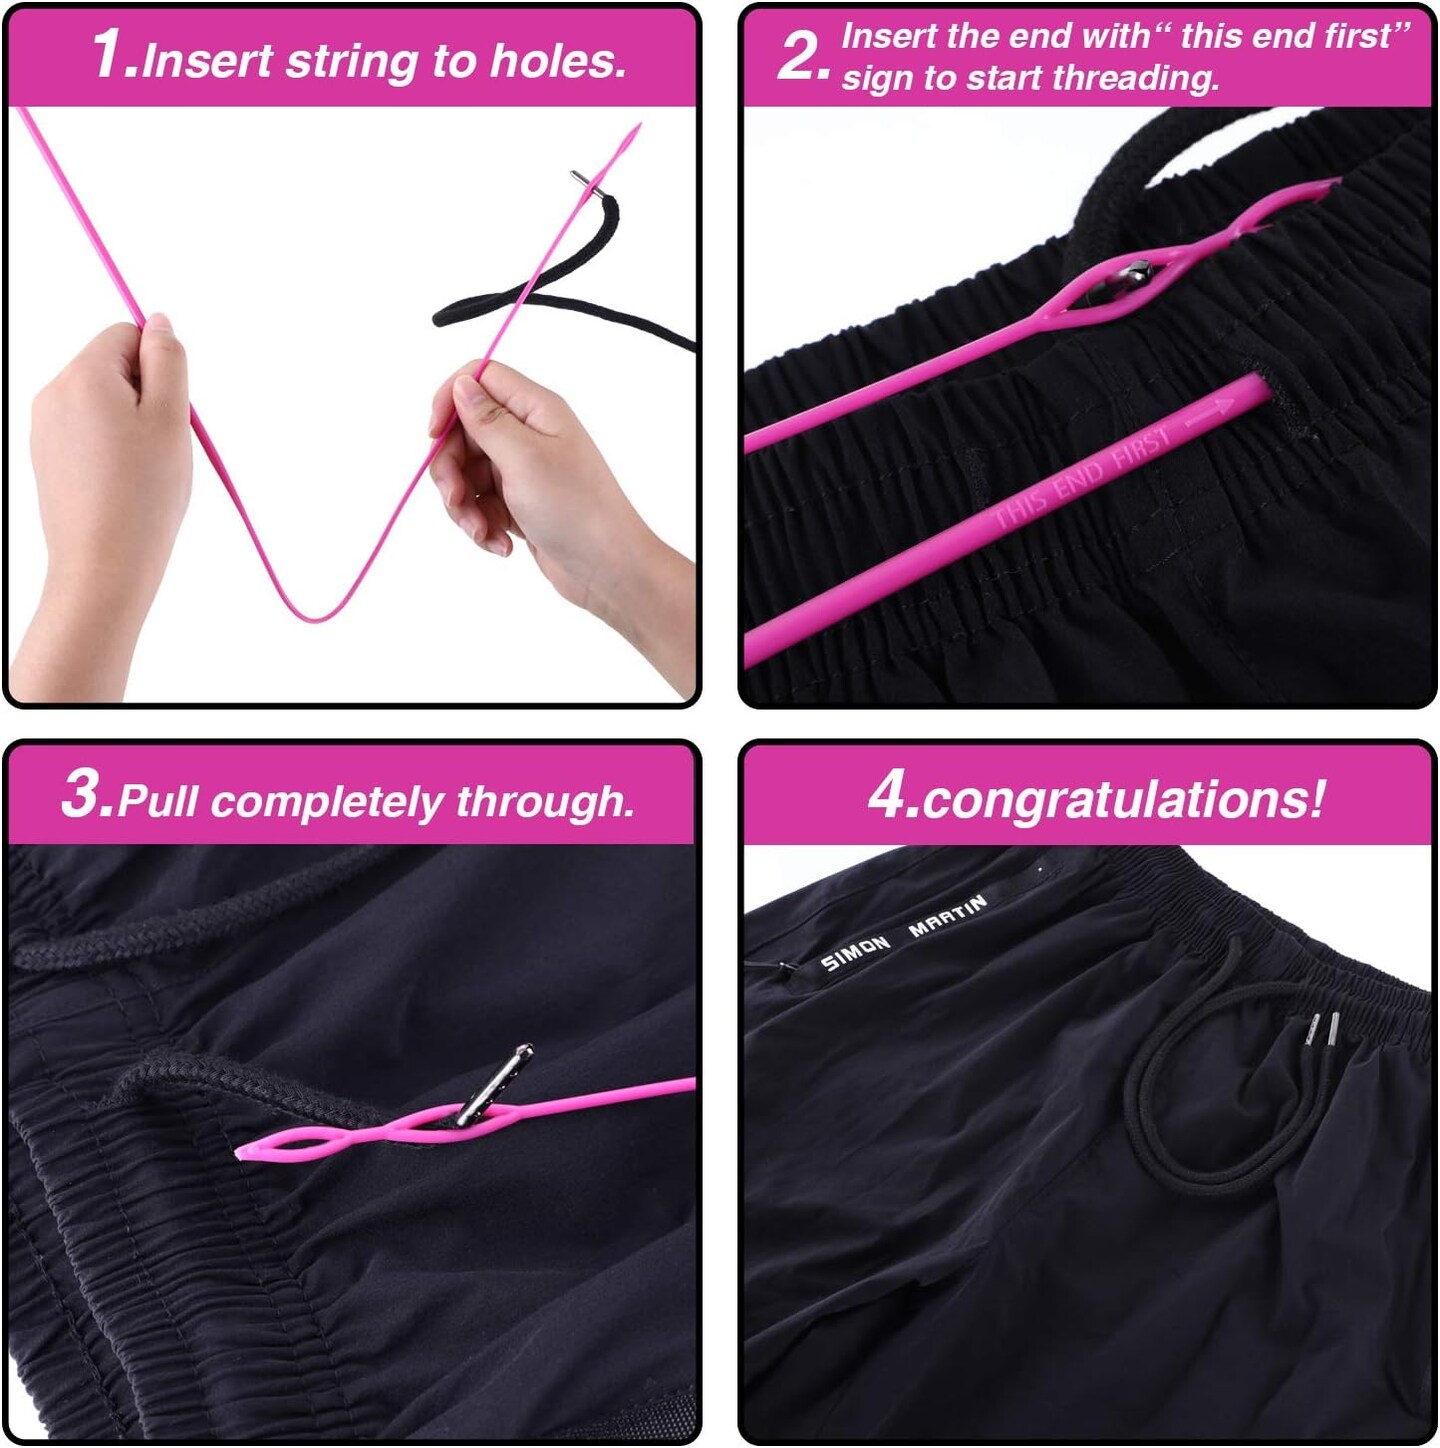 Drawstring Cords Replacement Drawstrings with Easy Threader for Sweatpants Shorts Pants Jackets Coats (Black, White)